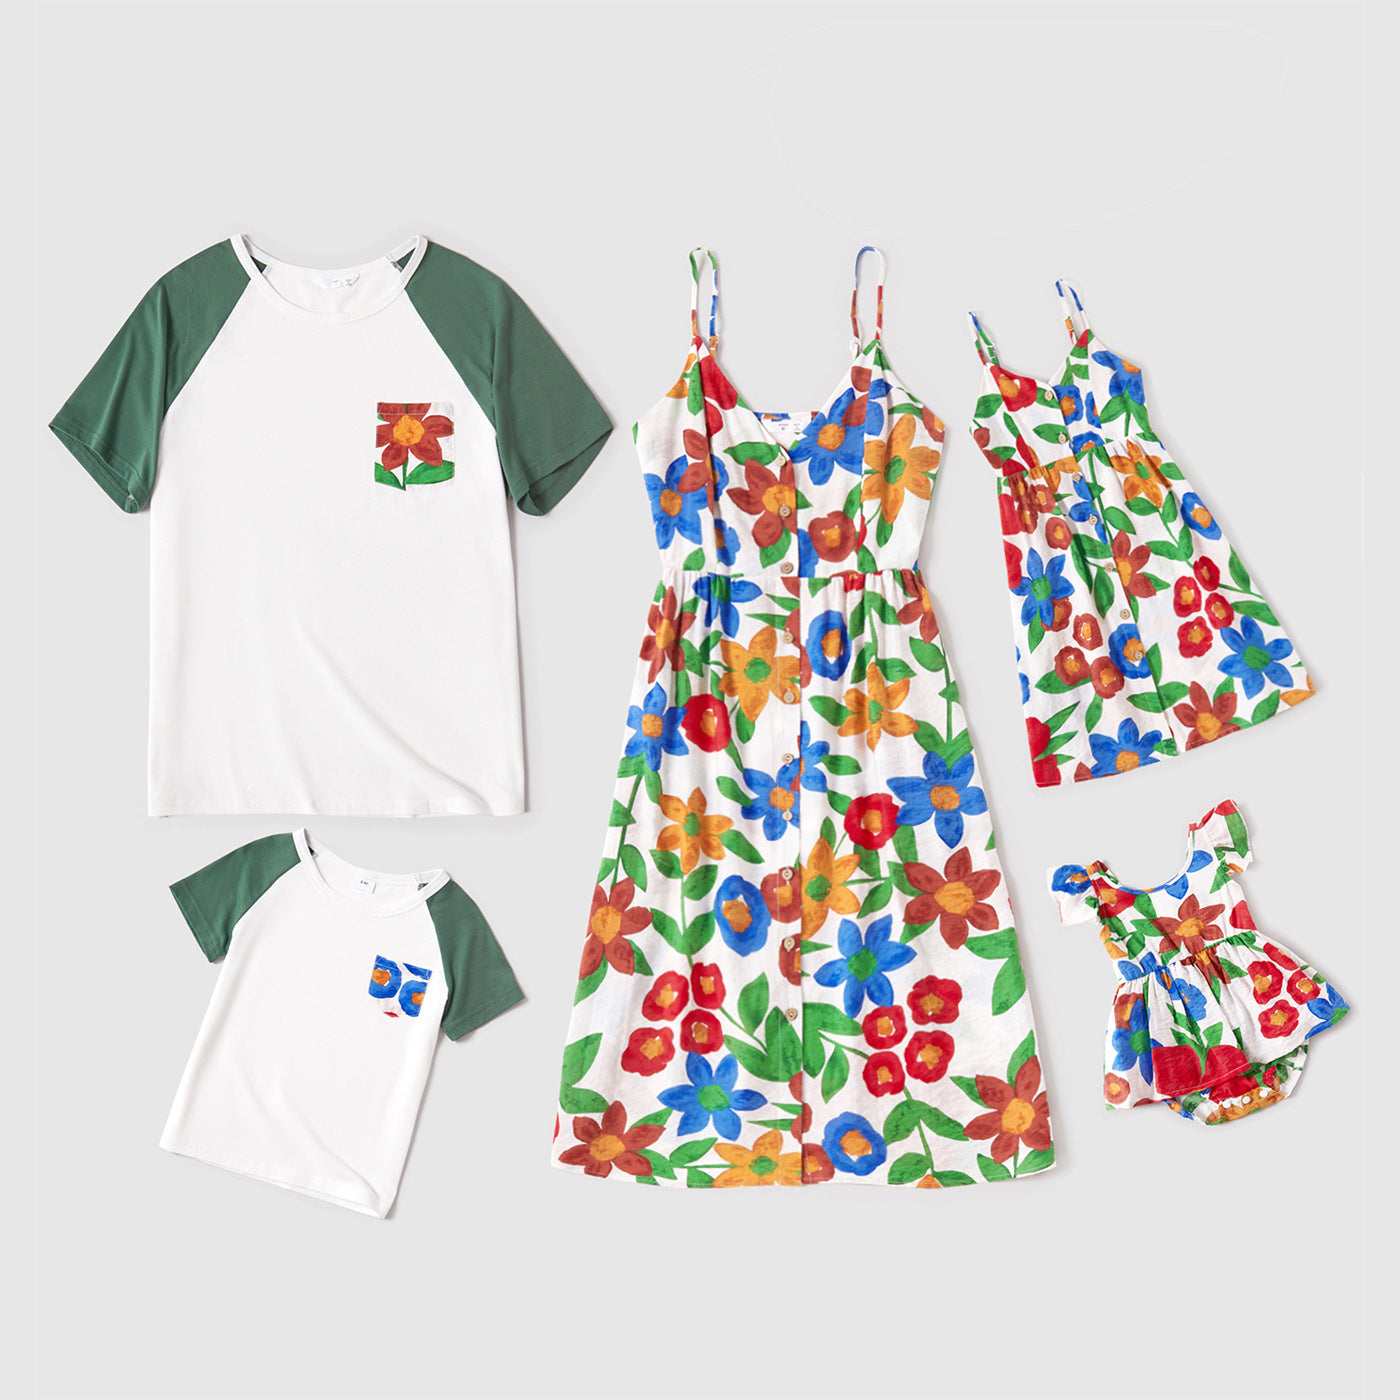 Family Matching All Over Floral Print V Neck Spaghetti Strap Midi Dresses and Splicing Short-sleeve T-shirts Sets